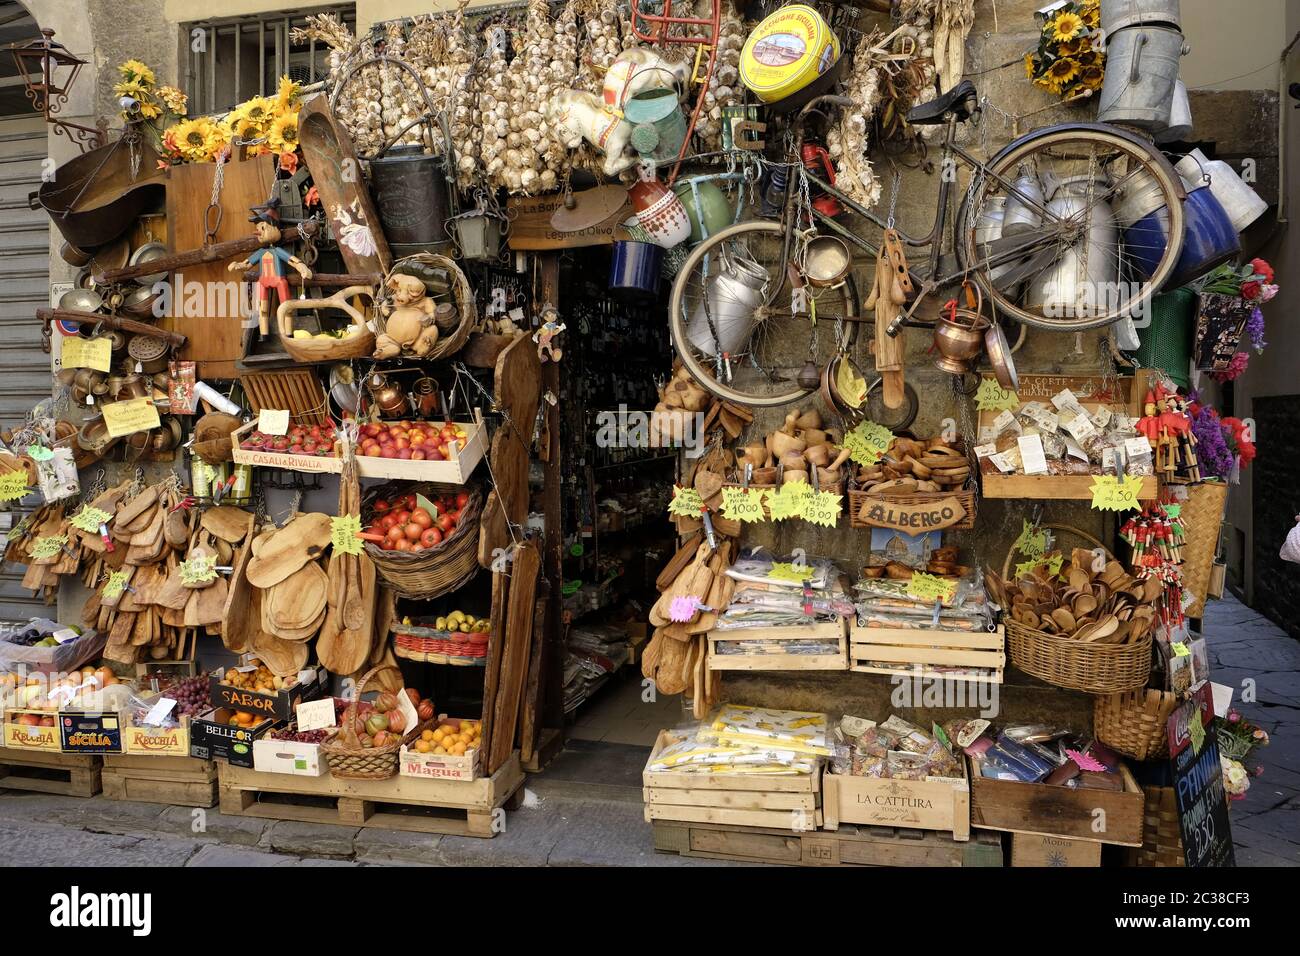 Characterful shop displaying fruit, vegetables and crafts in a Florence sidestreet near the Arno. Stock Photo